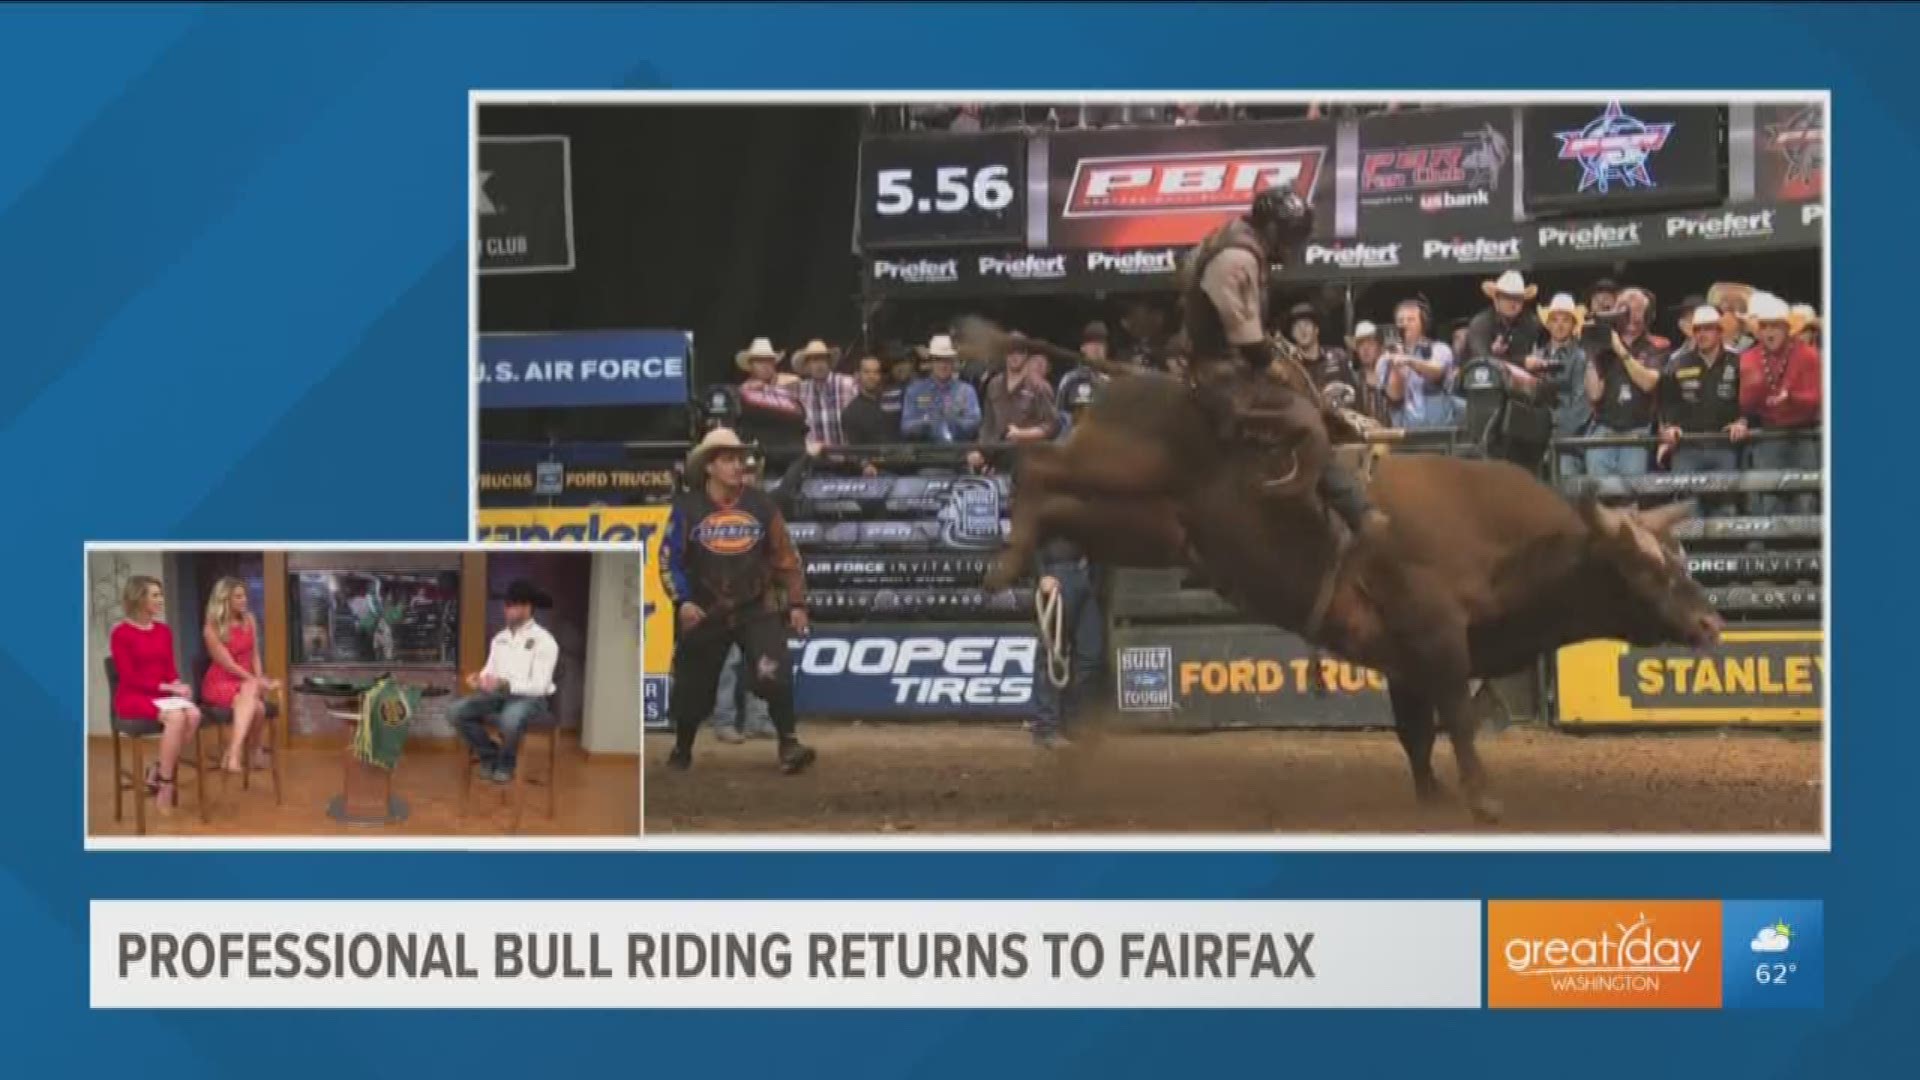 Yeehaw! Professional bull riding has returned to Fairfax and professional bull rider Sean Willingham tells us all about it.